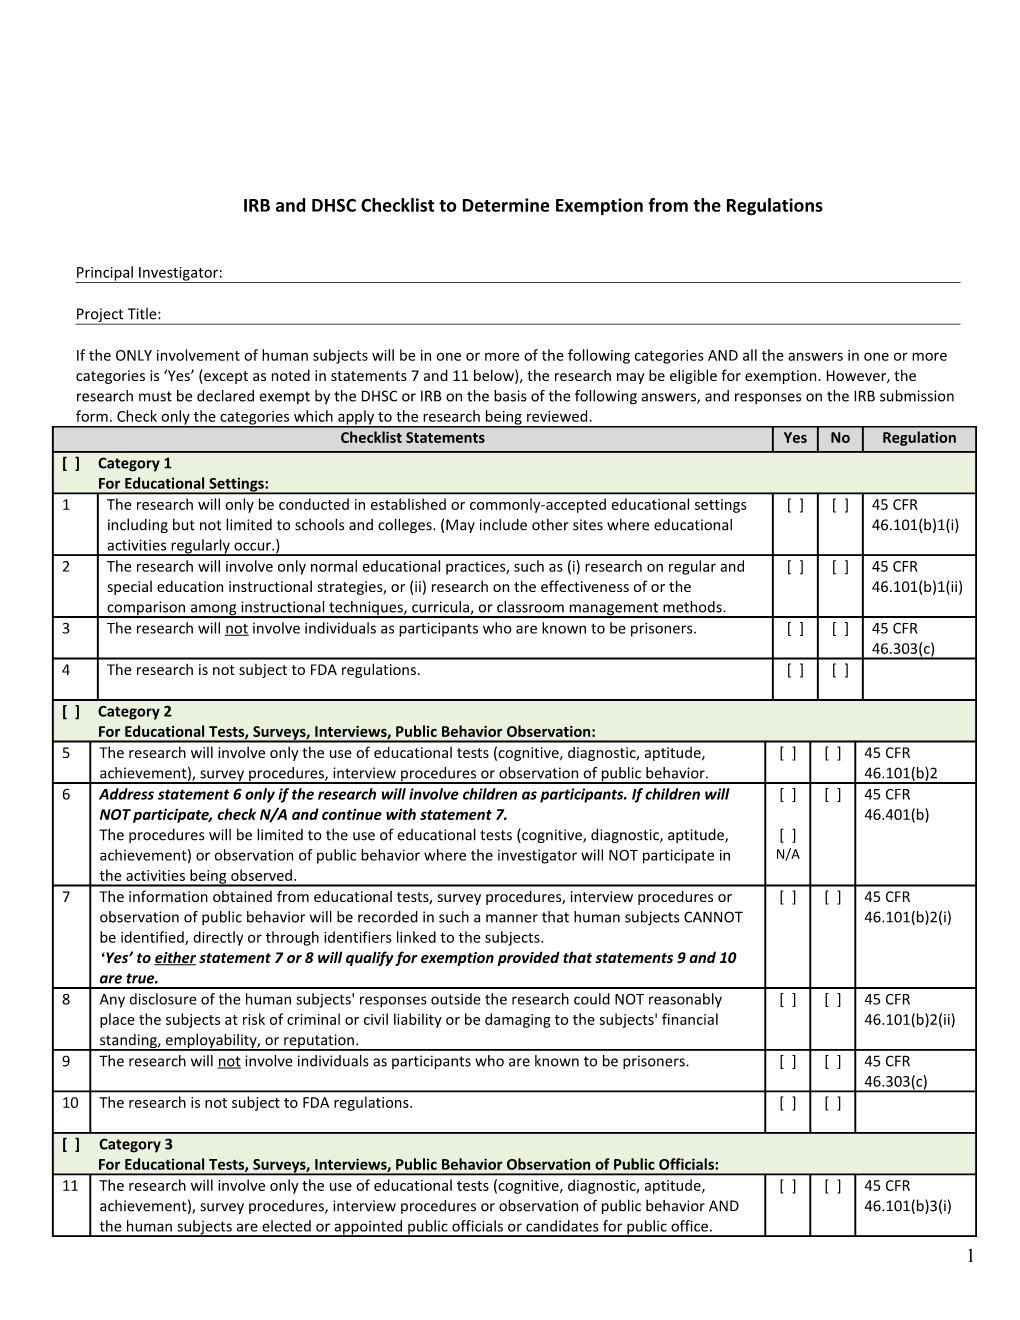 IRB and DHSC Checklist to Determine Exemption from the Regulations